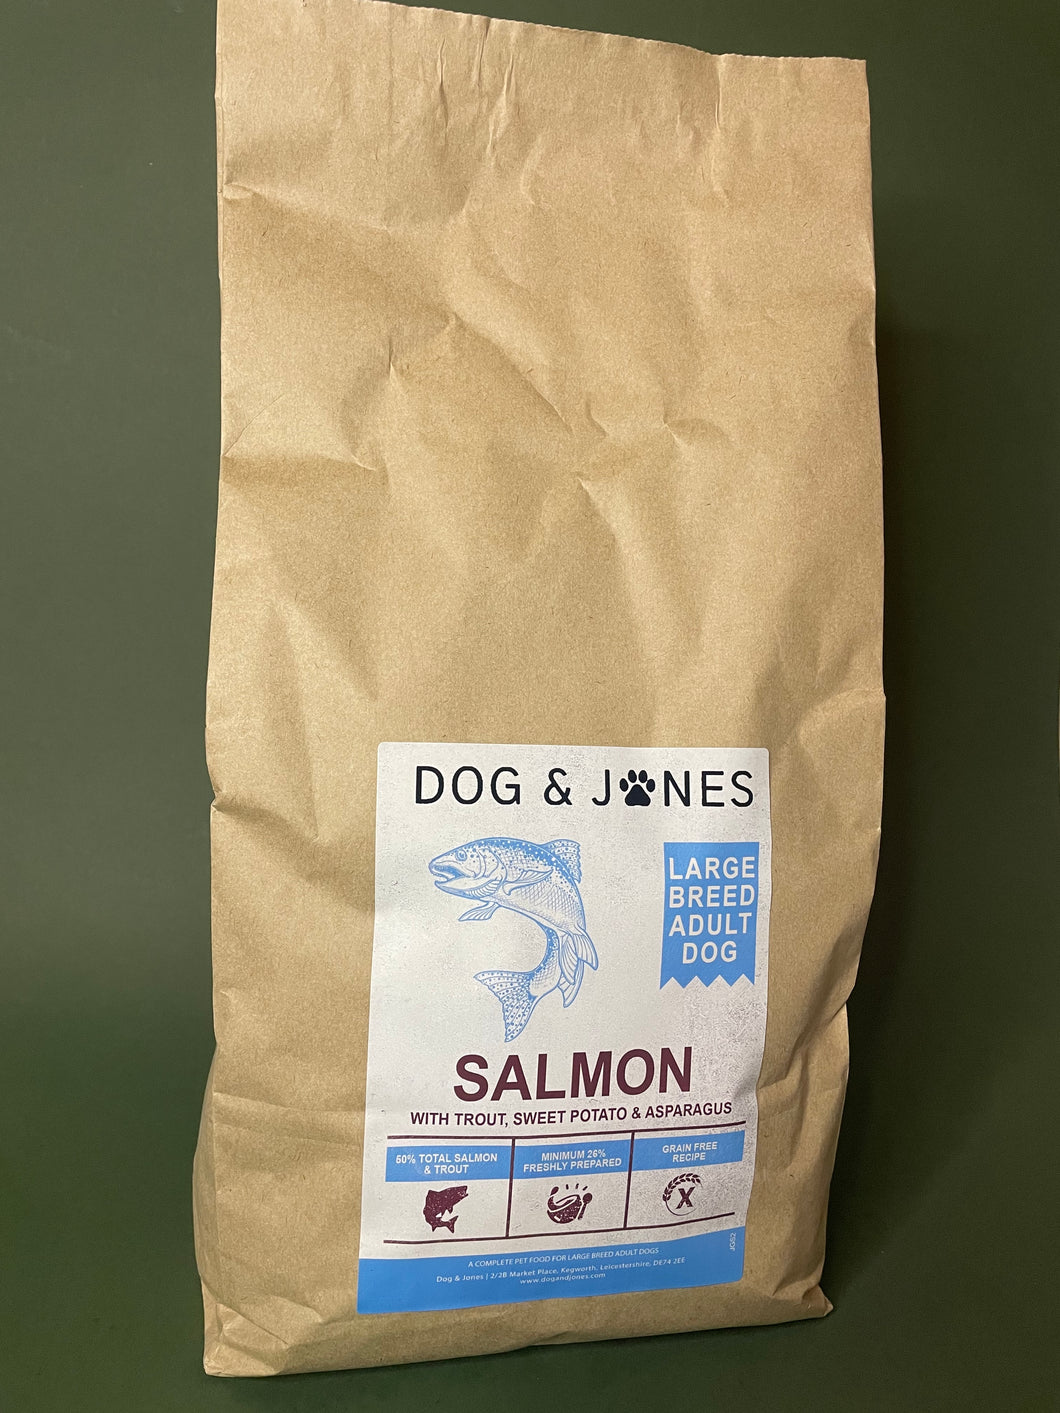 Dog & Jones Grain Free Large Breed Salmon For Adult Dogs